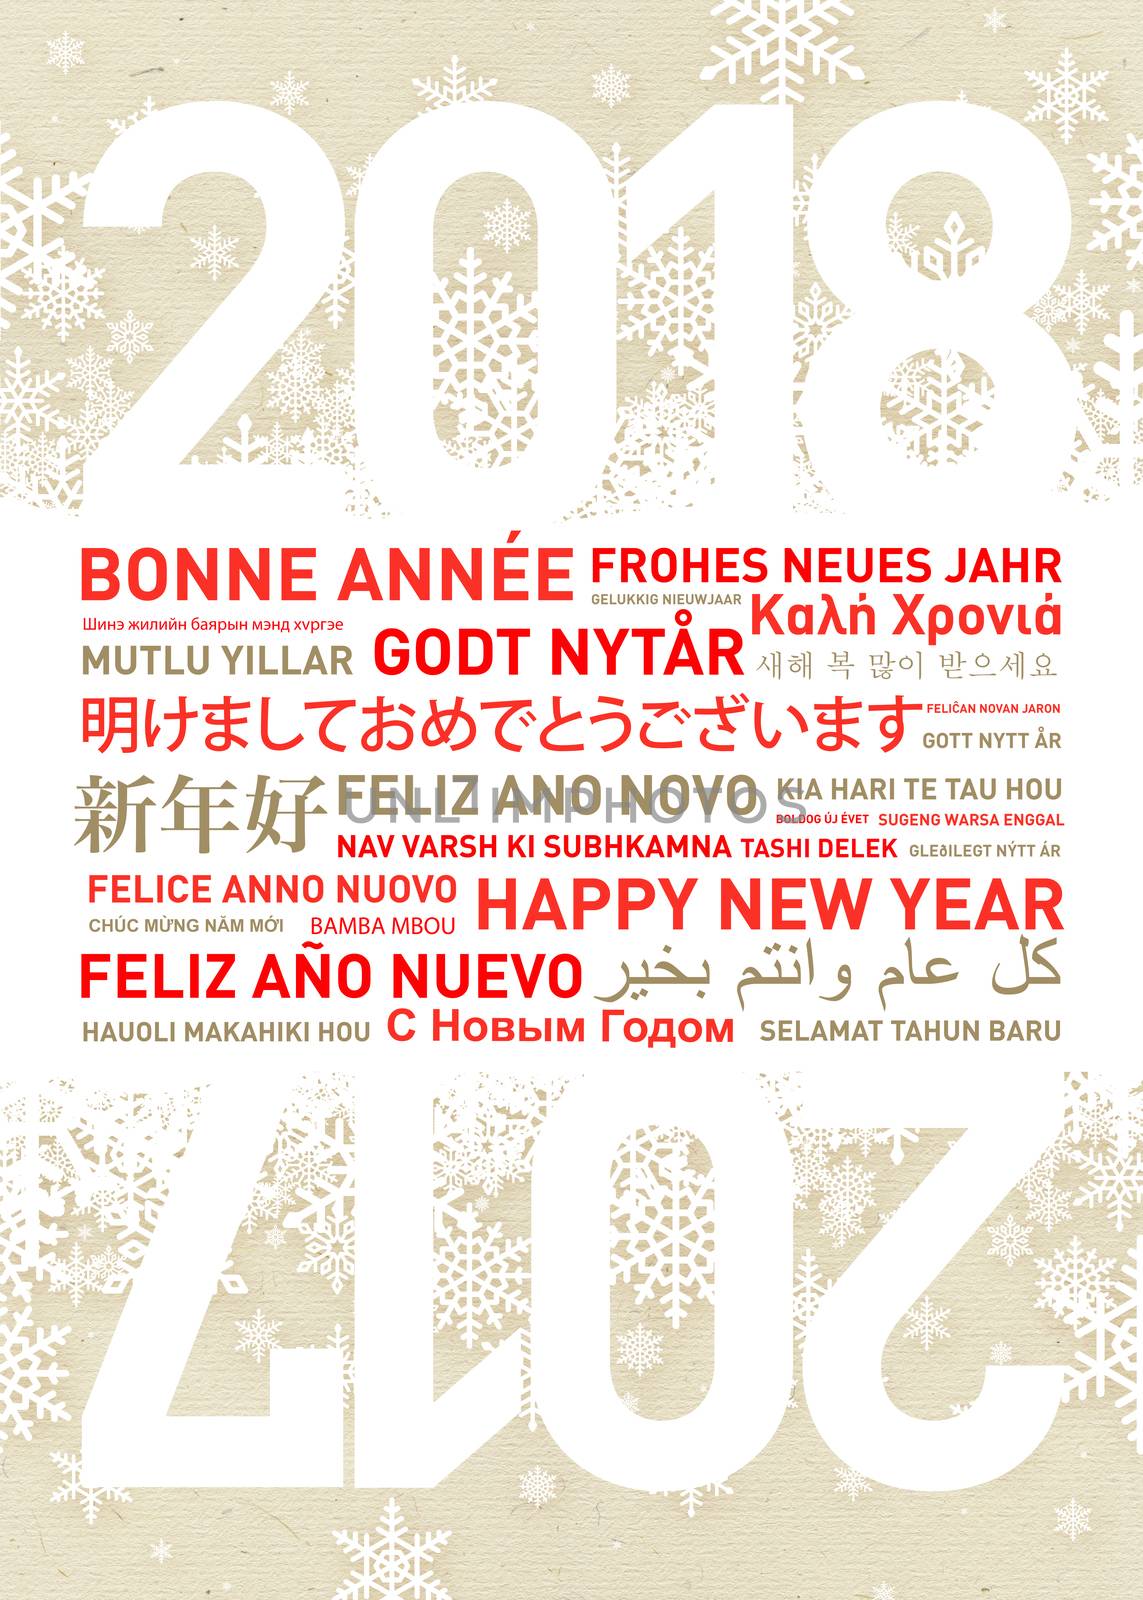 Happy new year card in different world languages